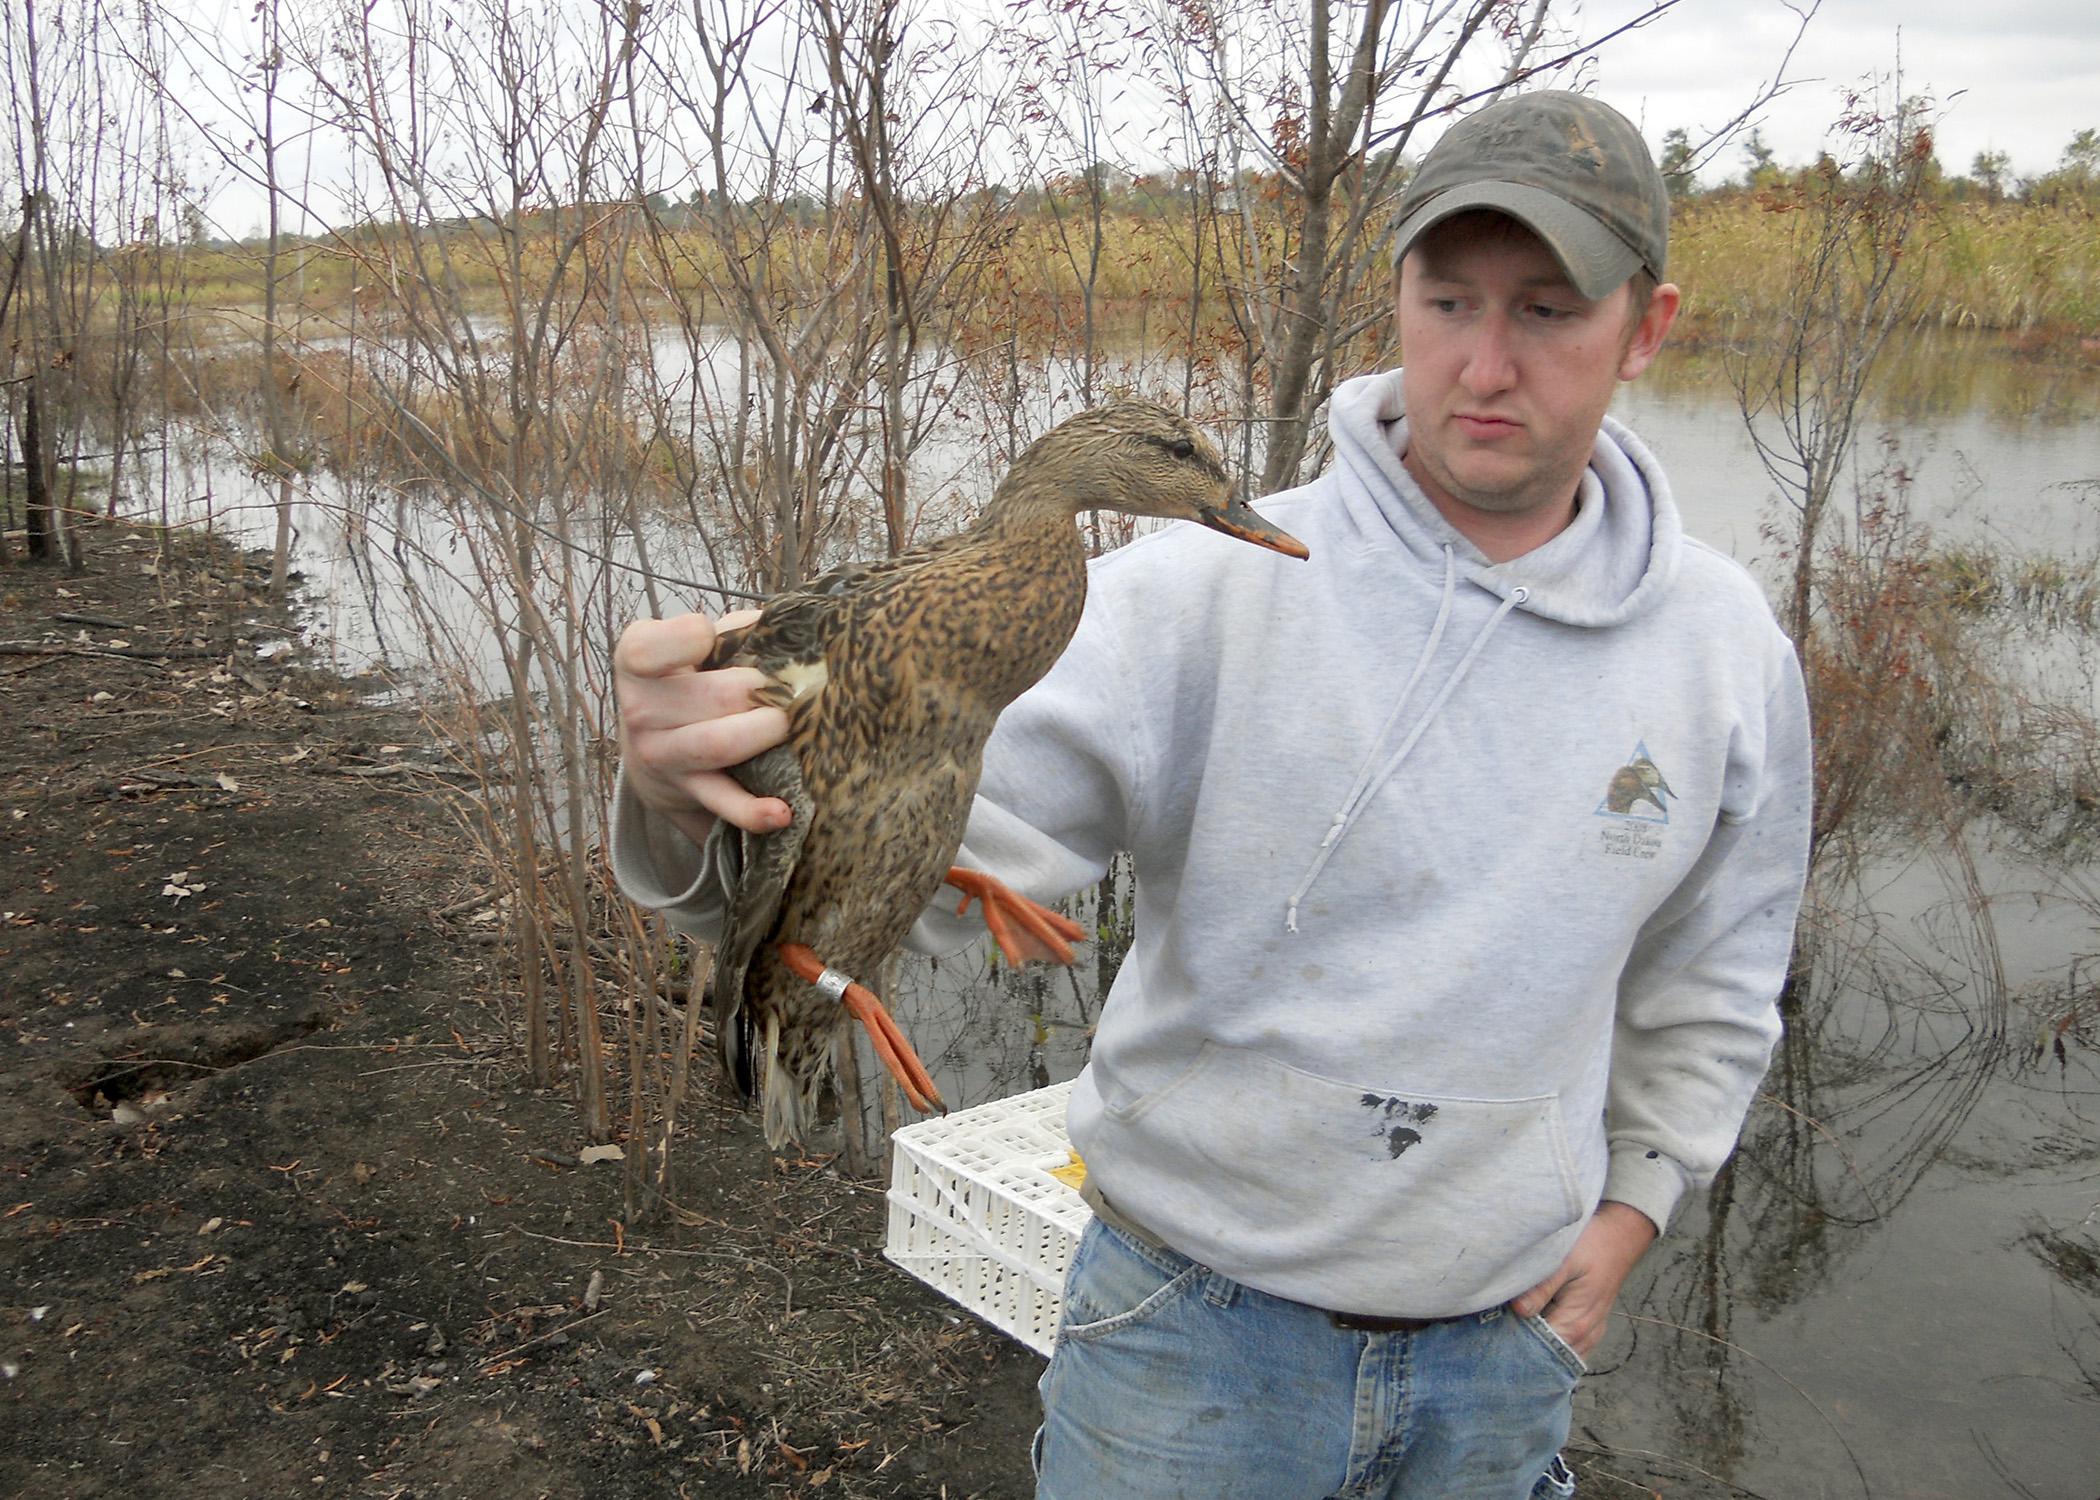 Mississippi State University graduate student Joe Lancaster holds a female mallard duck fitted with a radio frequency transmitter as part of a study tracking mallards in the south Delta. (Submitted Photo)